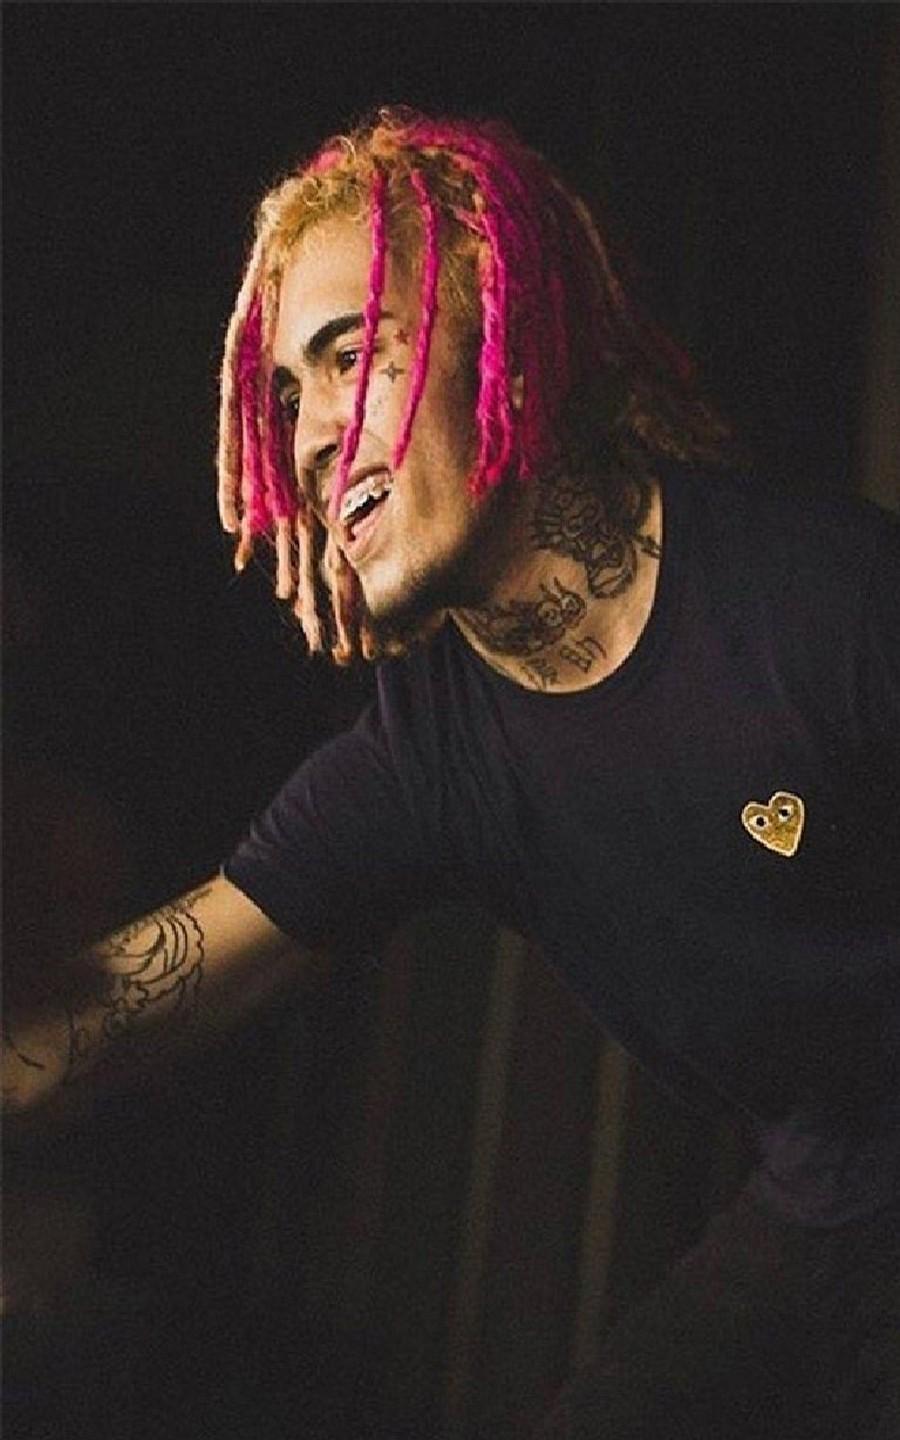 Lil Pump Lock Screen Wallpapers For Android Apk Download